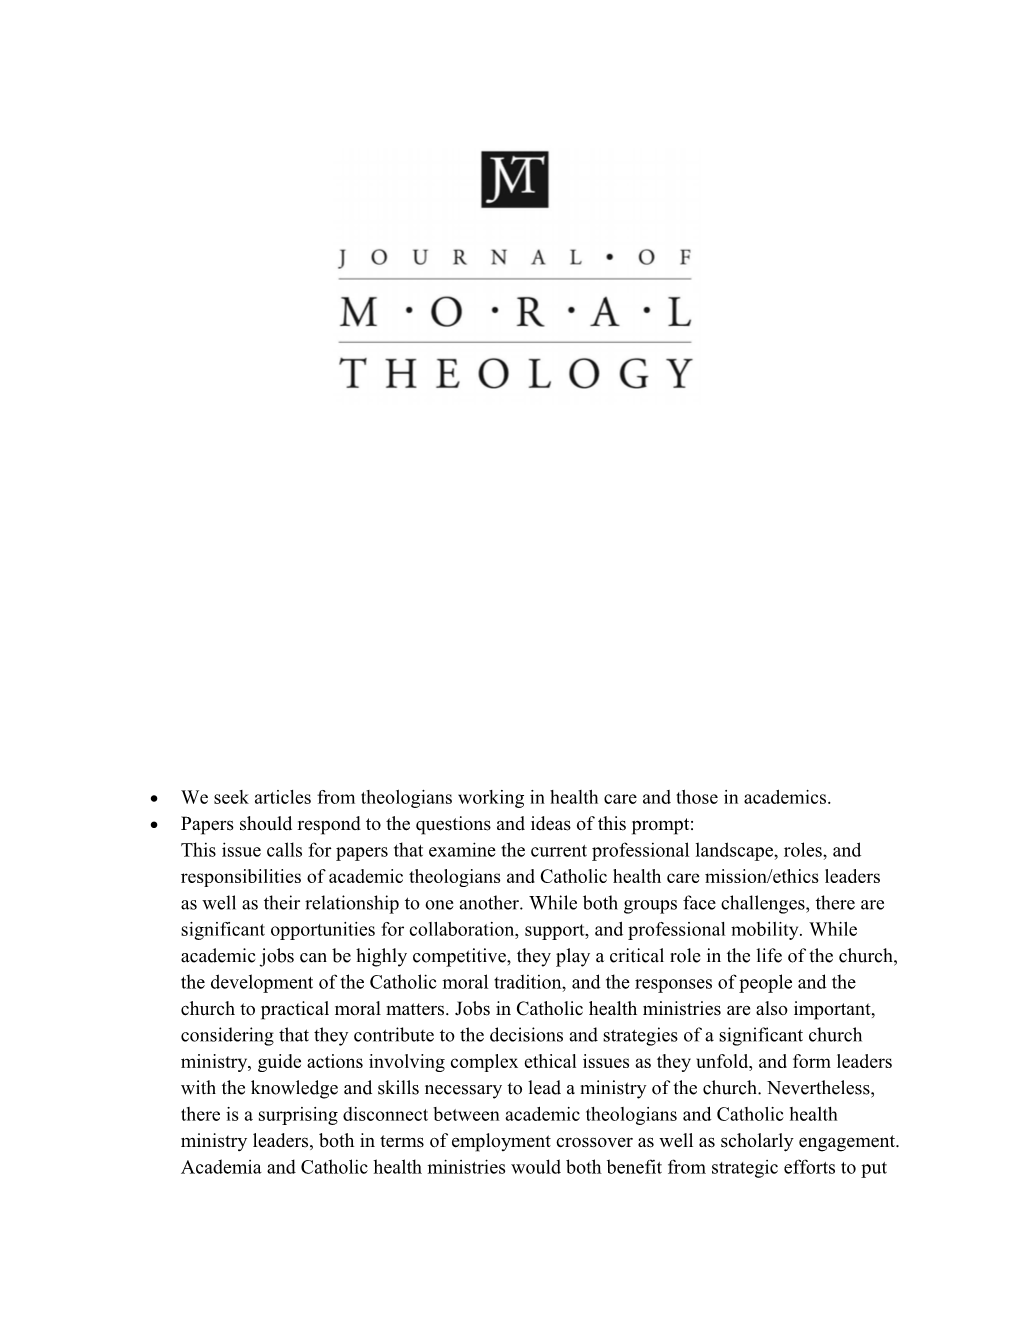 We Seek Articles from Theologians Working in Health Care and Those in Academics